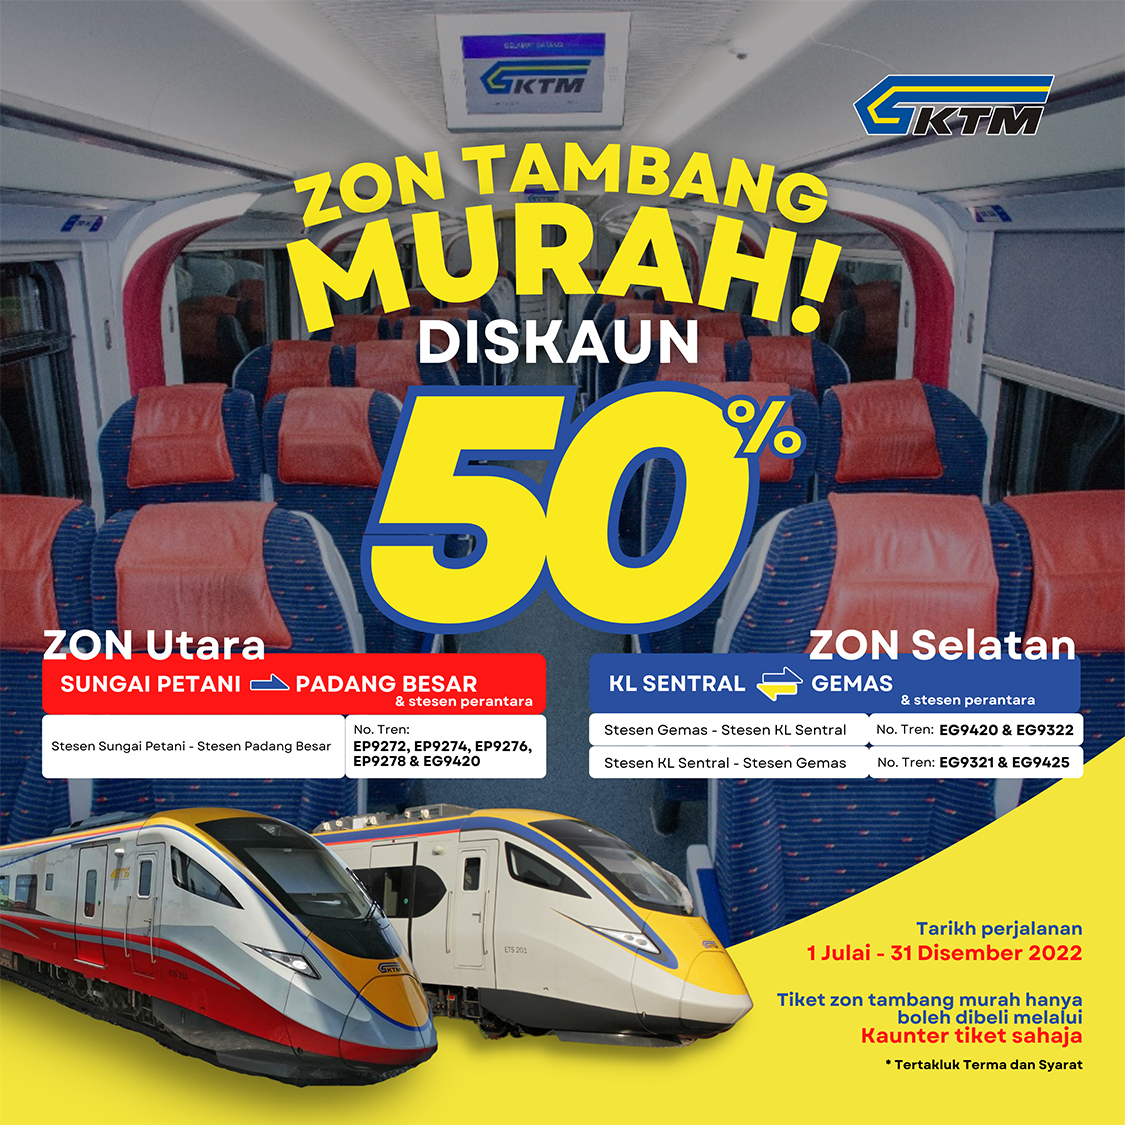 ETS Low Fare Zone, 50% Discount, Travel Date Starting 1st July To 31st December 2022